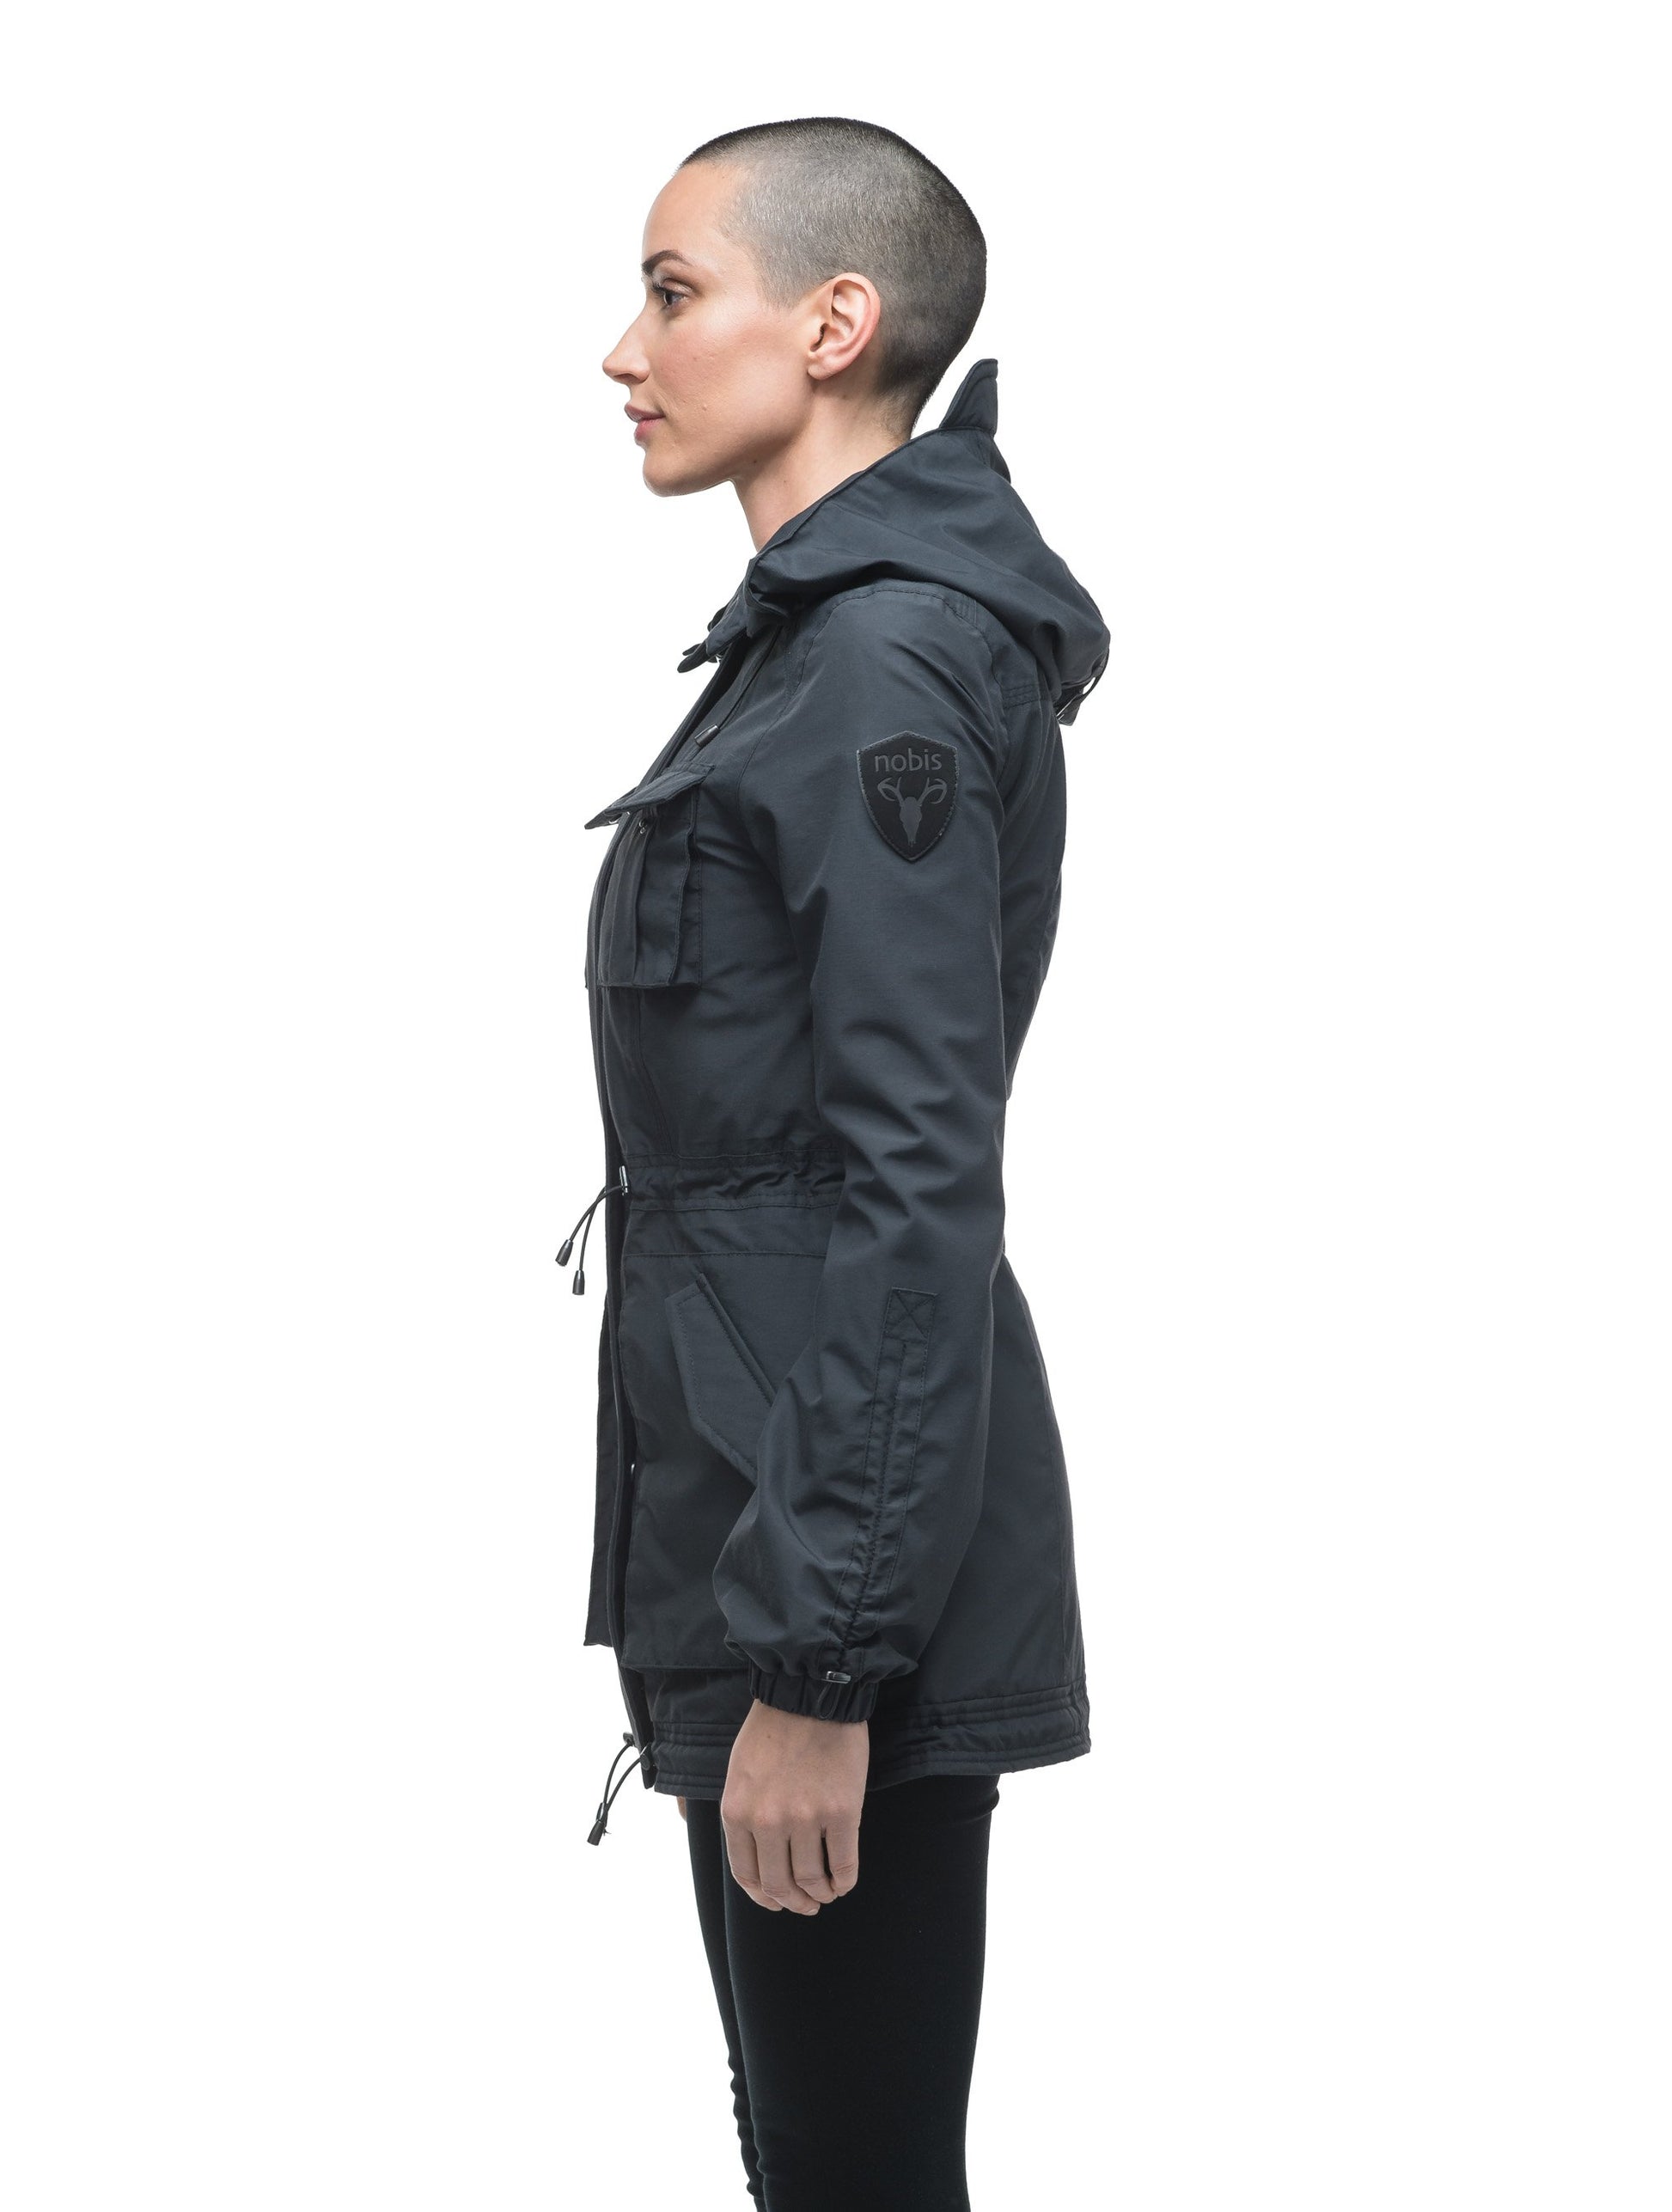 Women's hooded shirt jacket with four front pockets and adjustable waist in Black